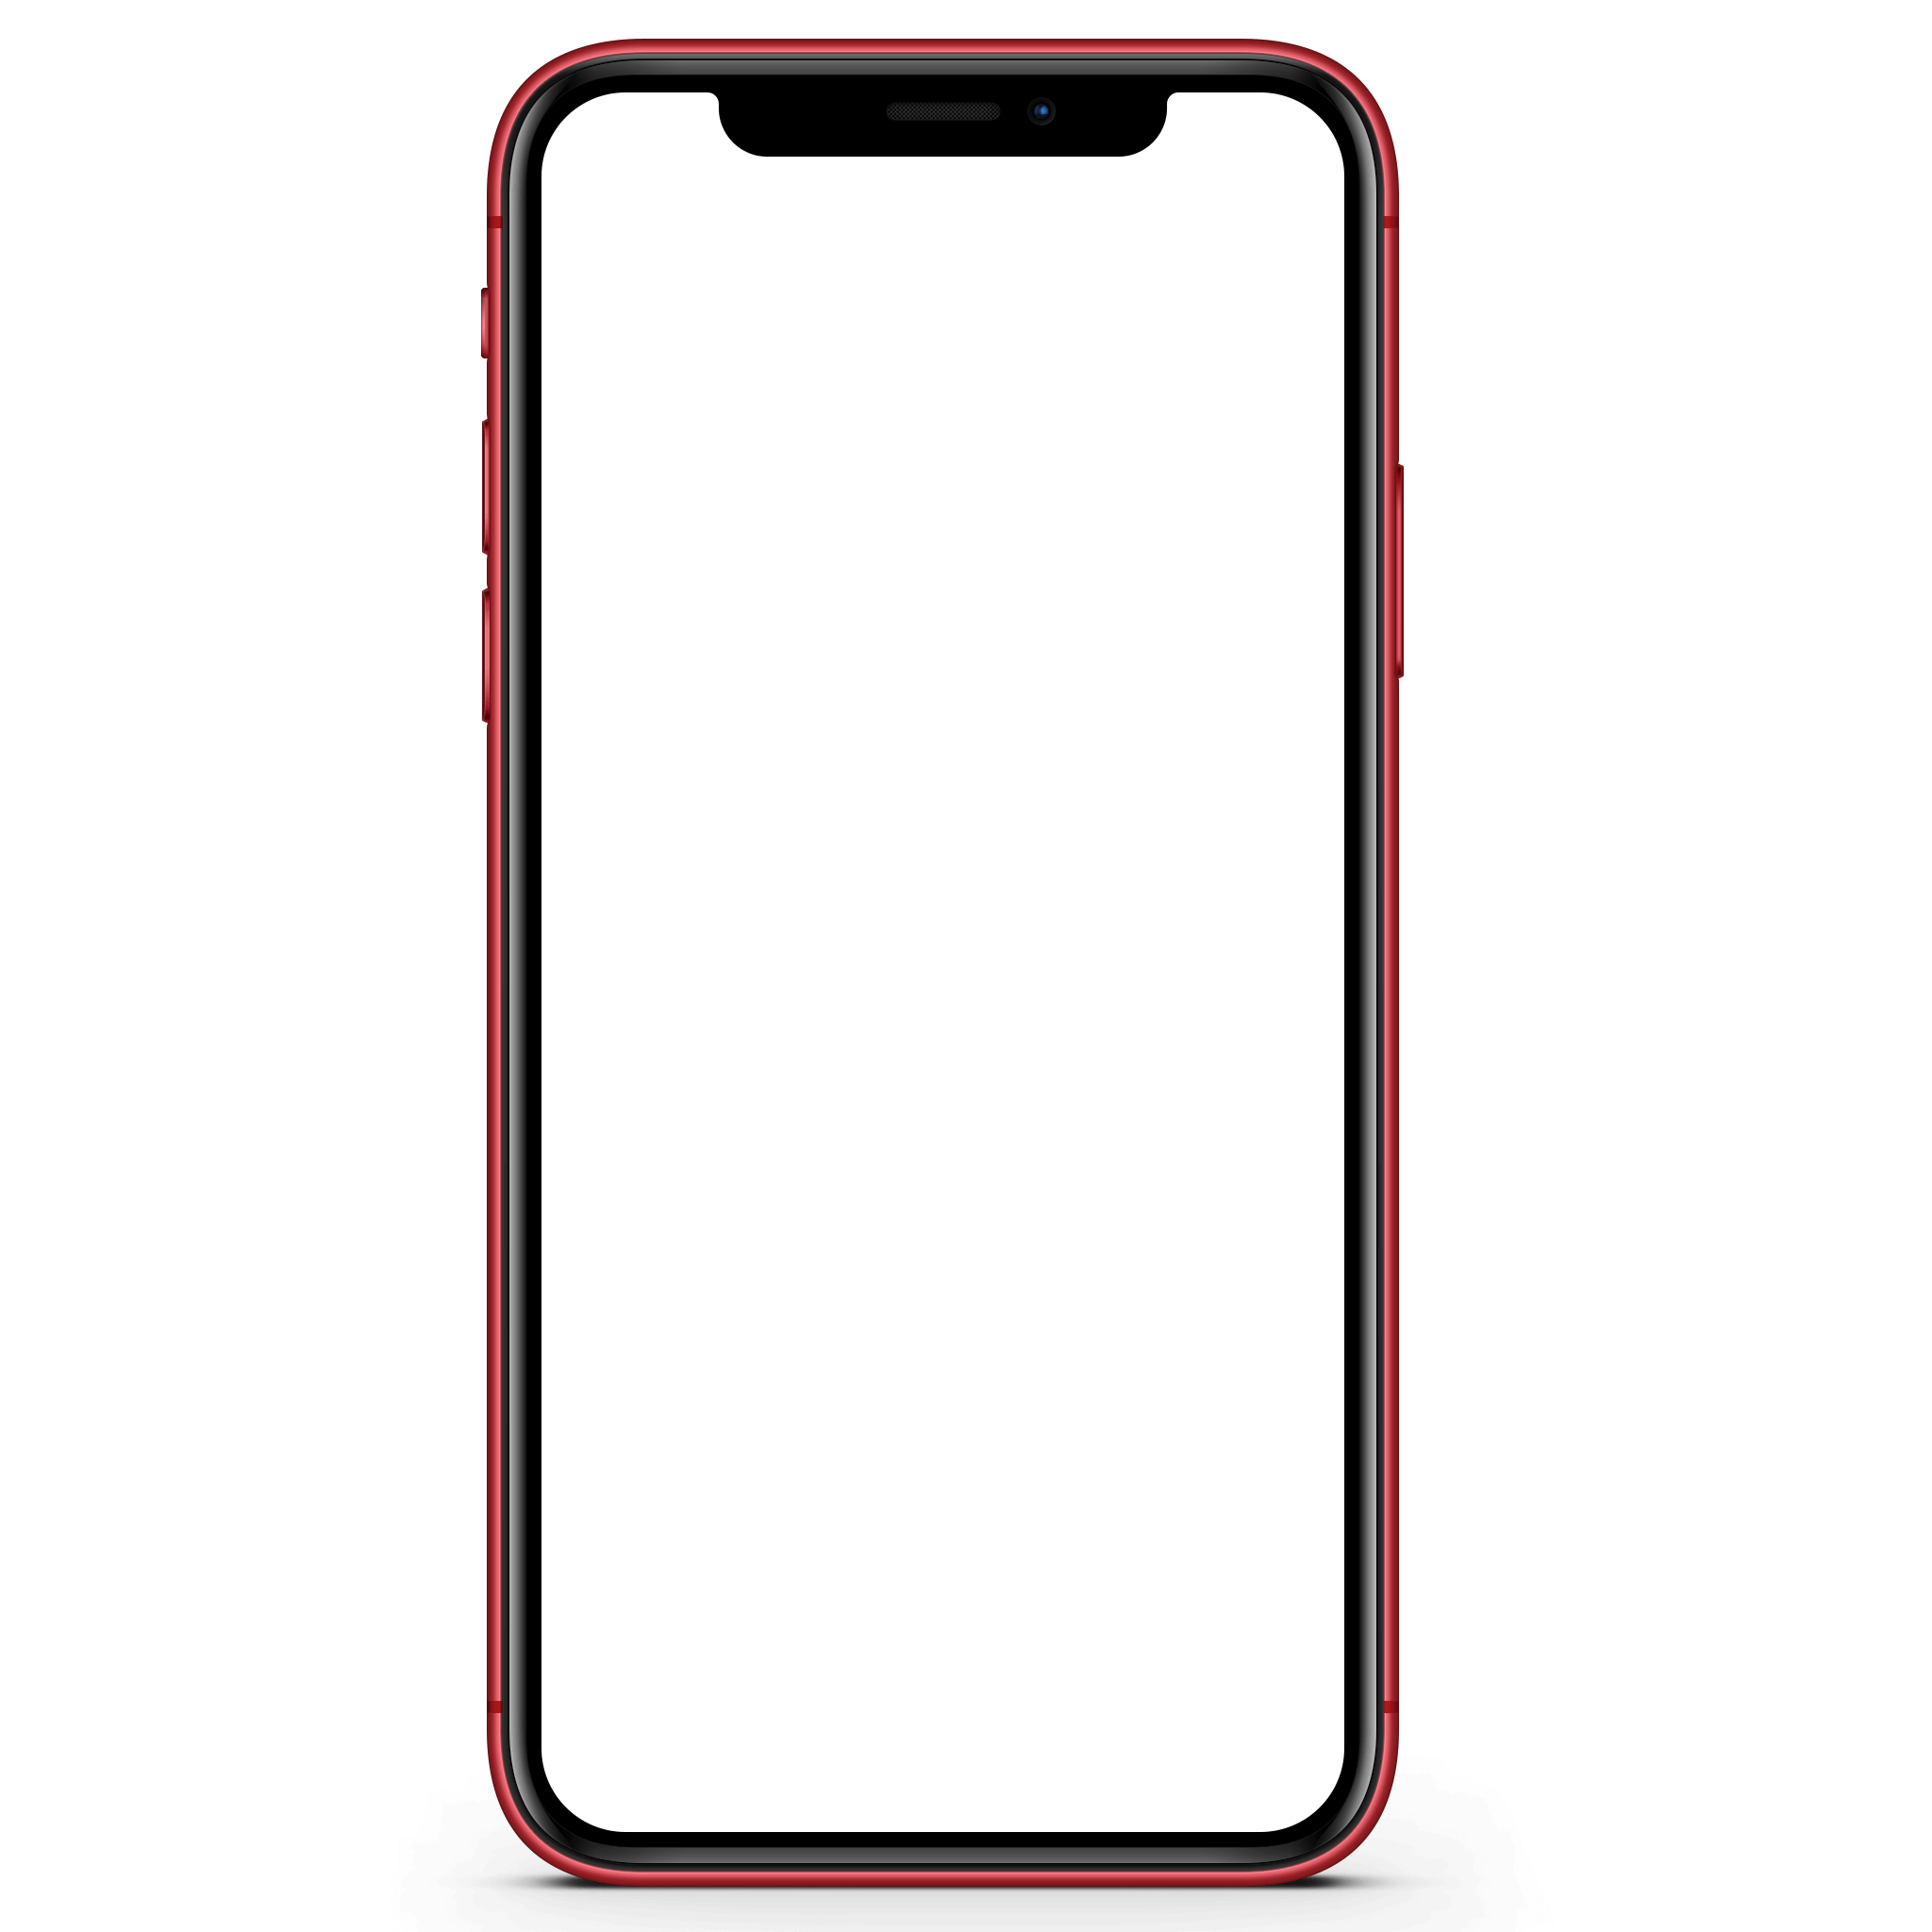 Iphone 15 pro png. Экран iphone x PNG. Рамка iphone x. Iphone x PNG transparent. Iphone XR мокап.